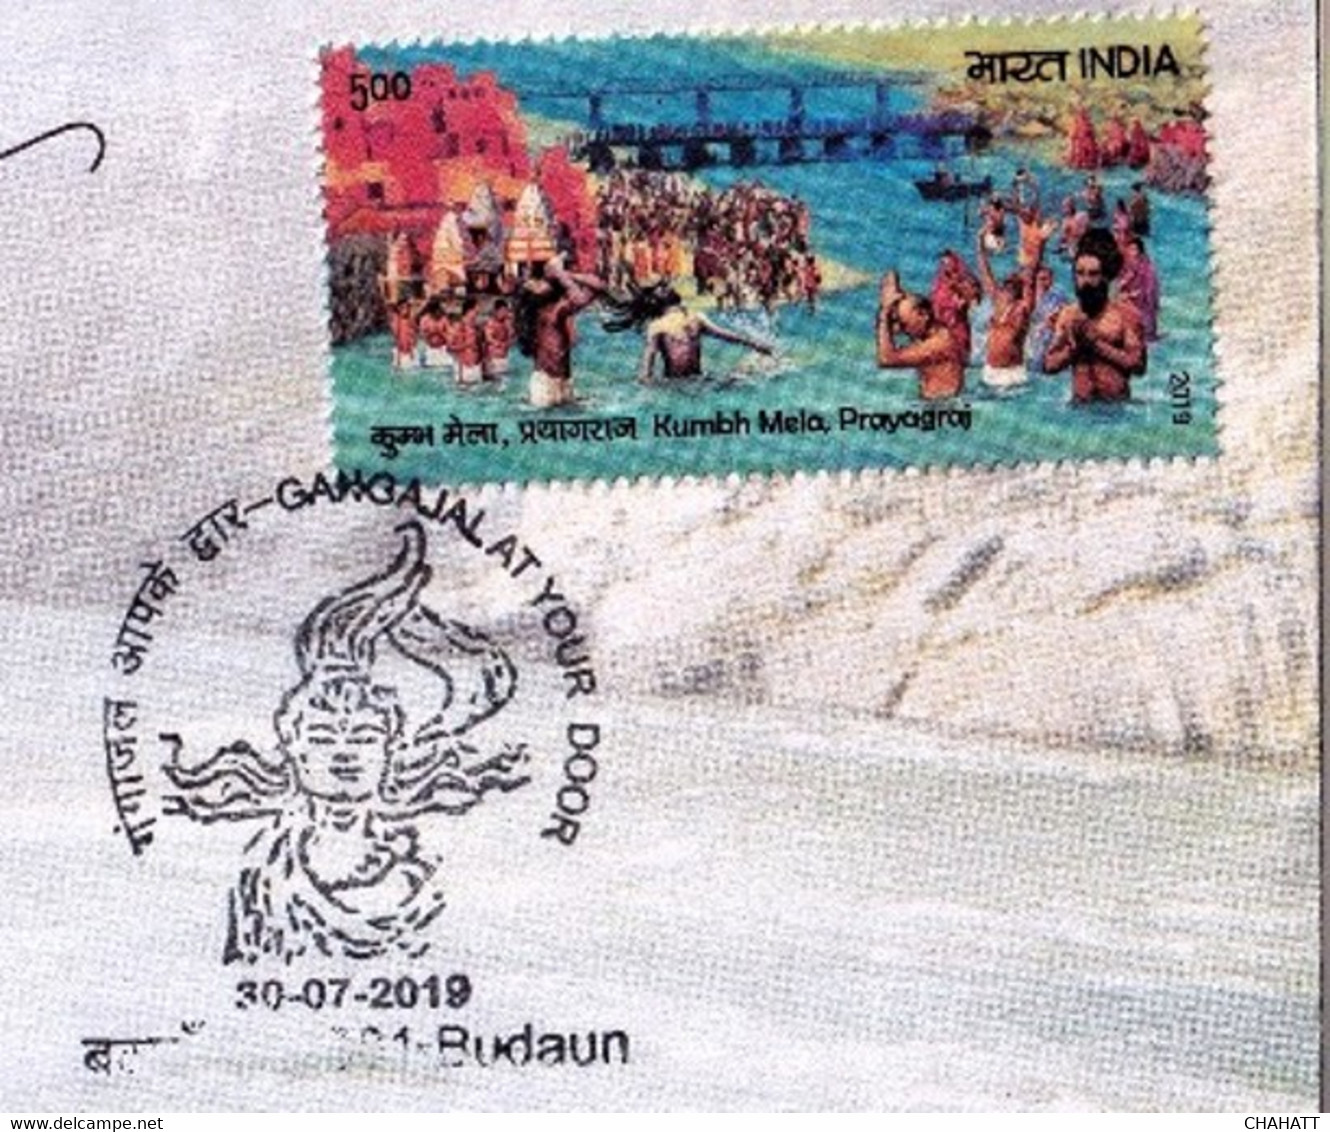 HINDUISM- LORD SHIVA- RIVER GANGA- GANGES WATER - SPECIAL COVER WITH PICTORIAL CANCELLATION- INDIA-2019-BX3-30 - Hinduism